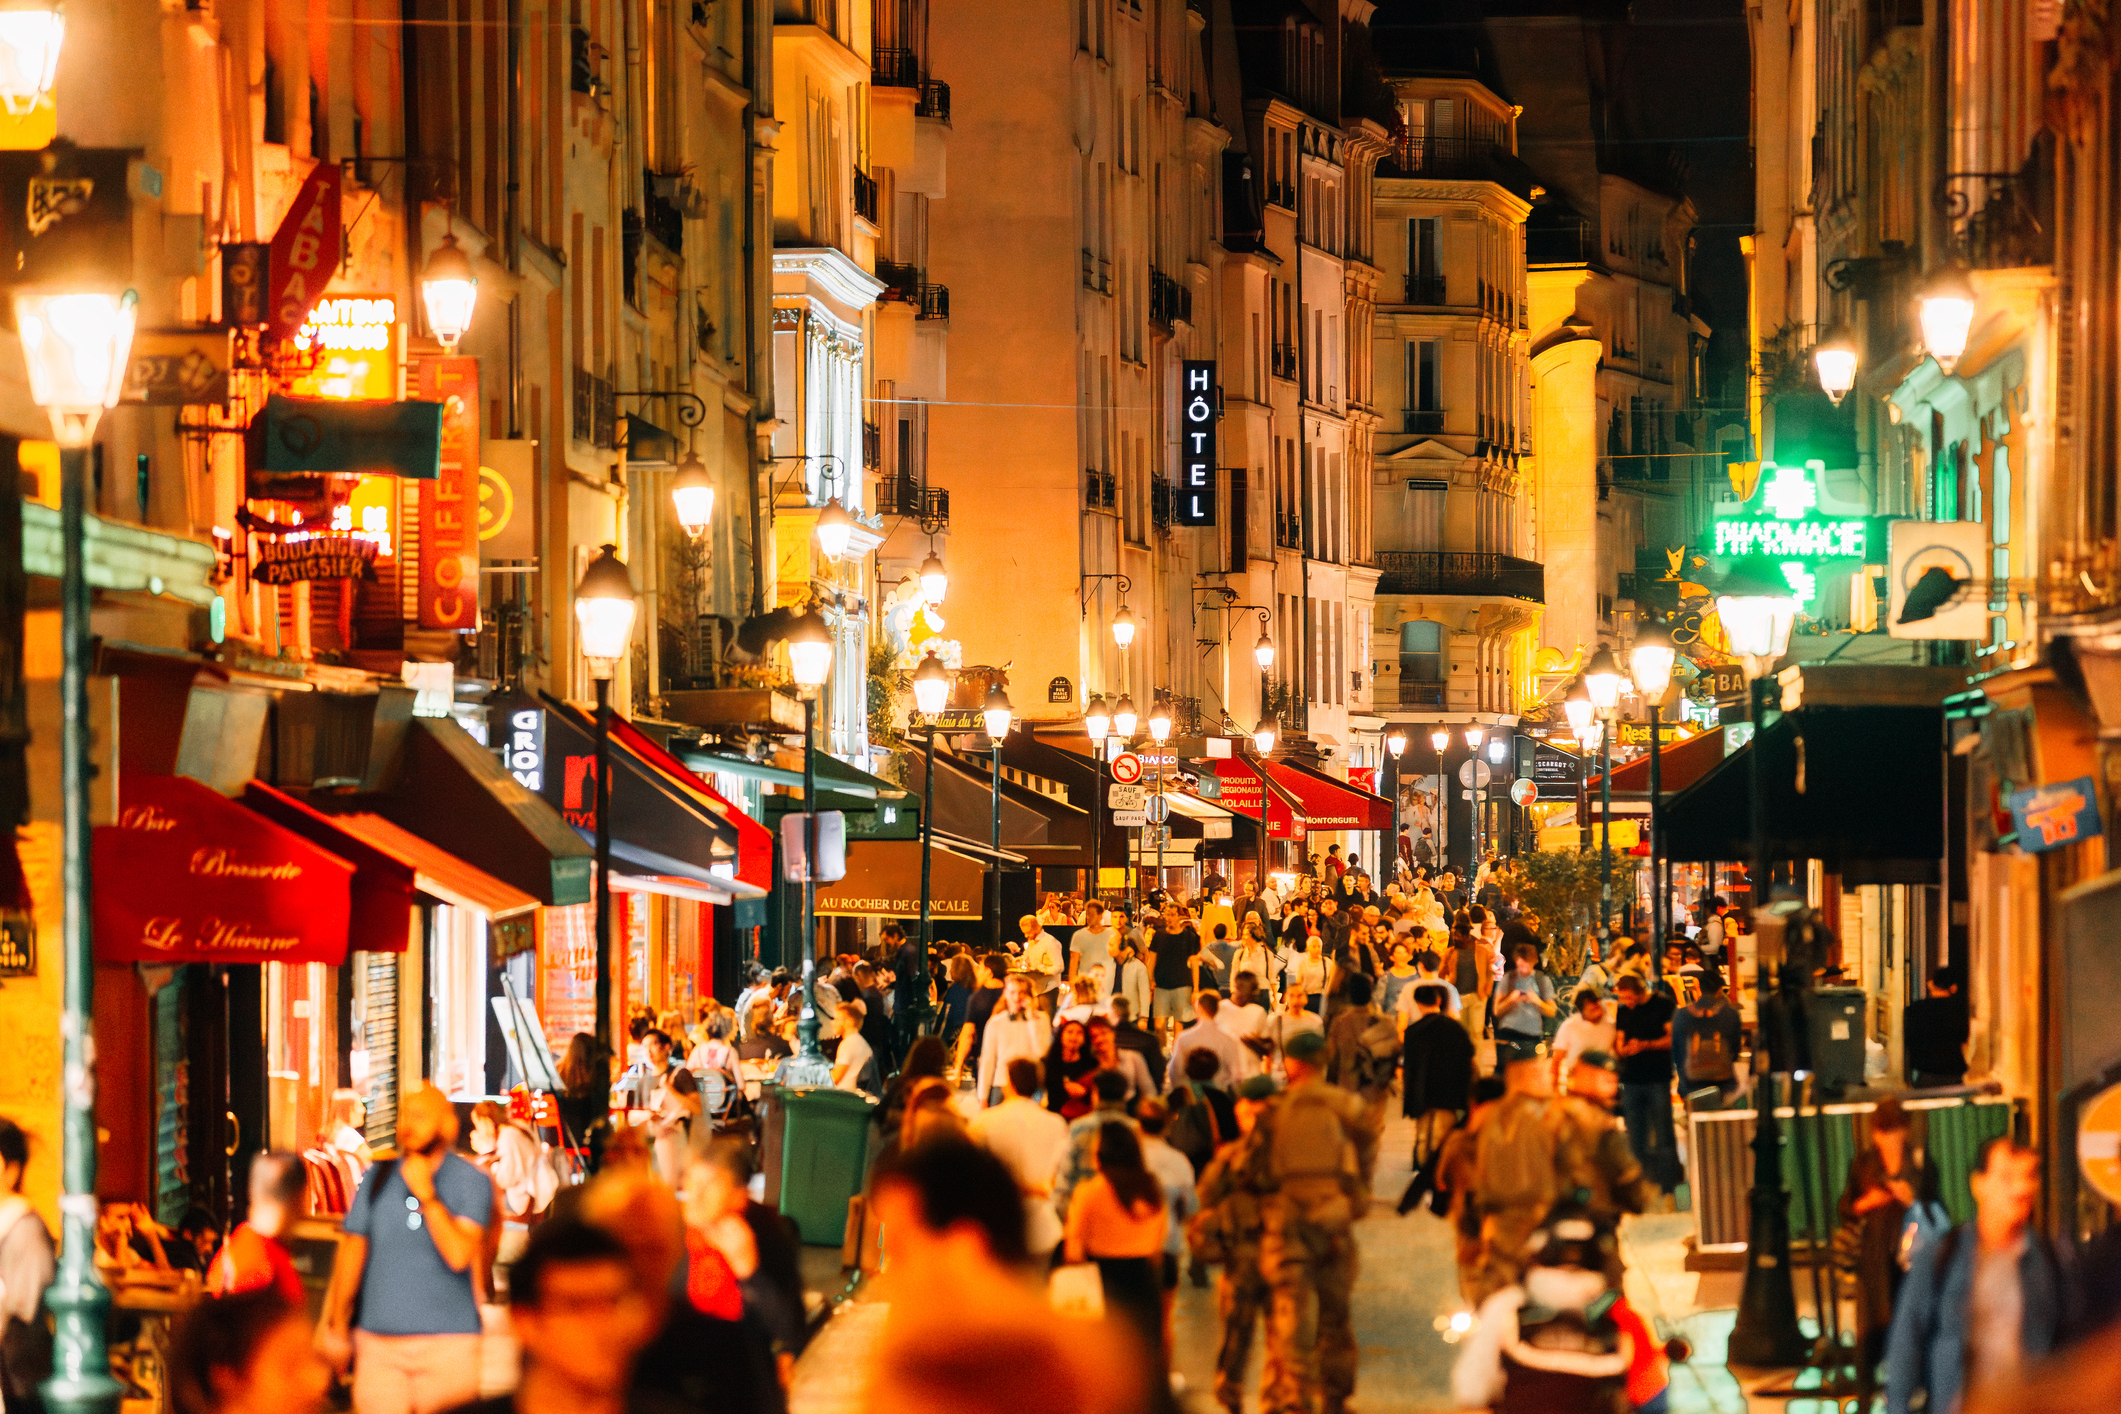 A bustling city street scene at night with illuminated shop signs and a crowd of pedestrians